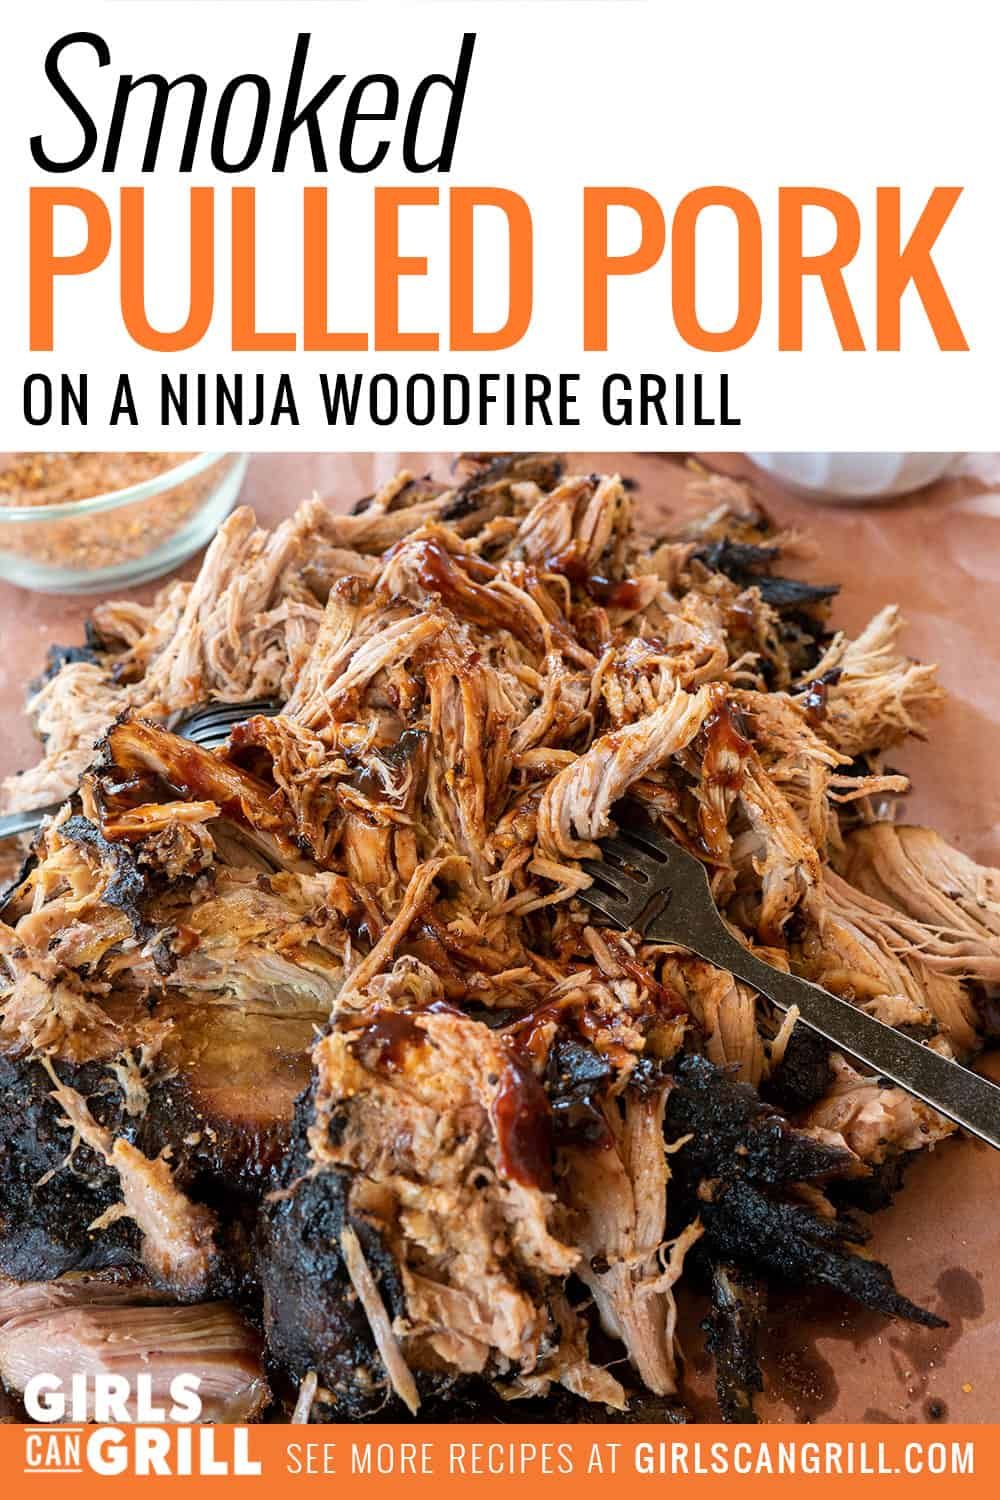 Smoked Pulled Pork on a Ninja Woodfire Grill